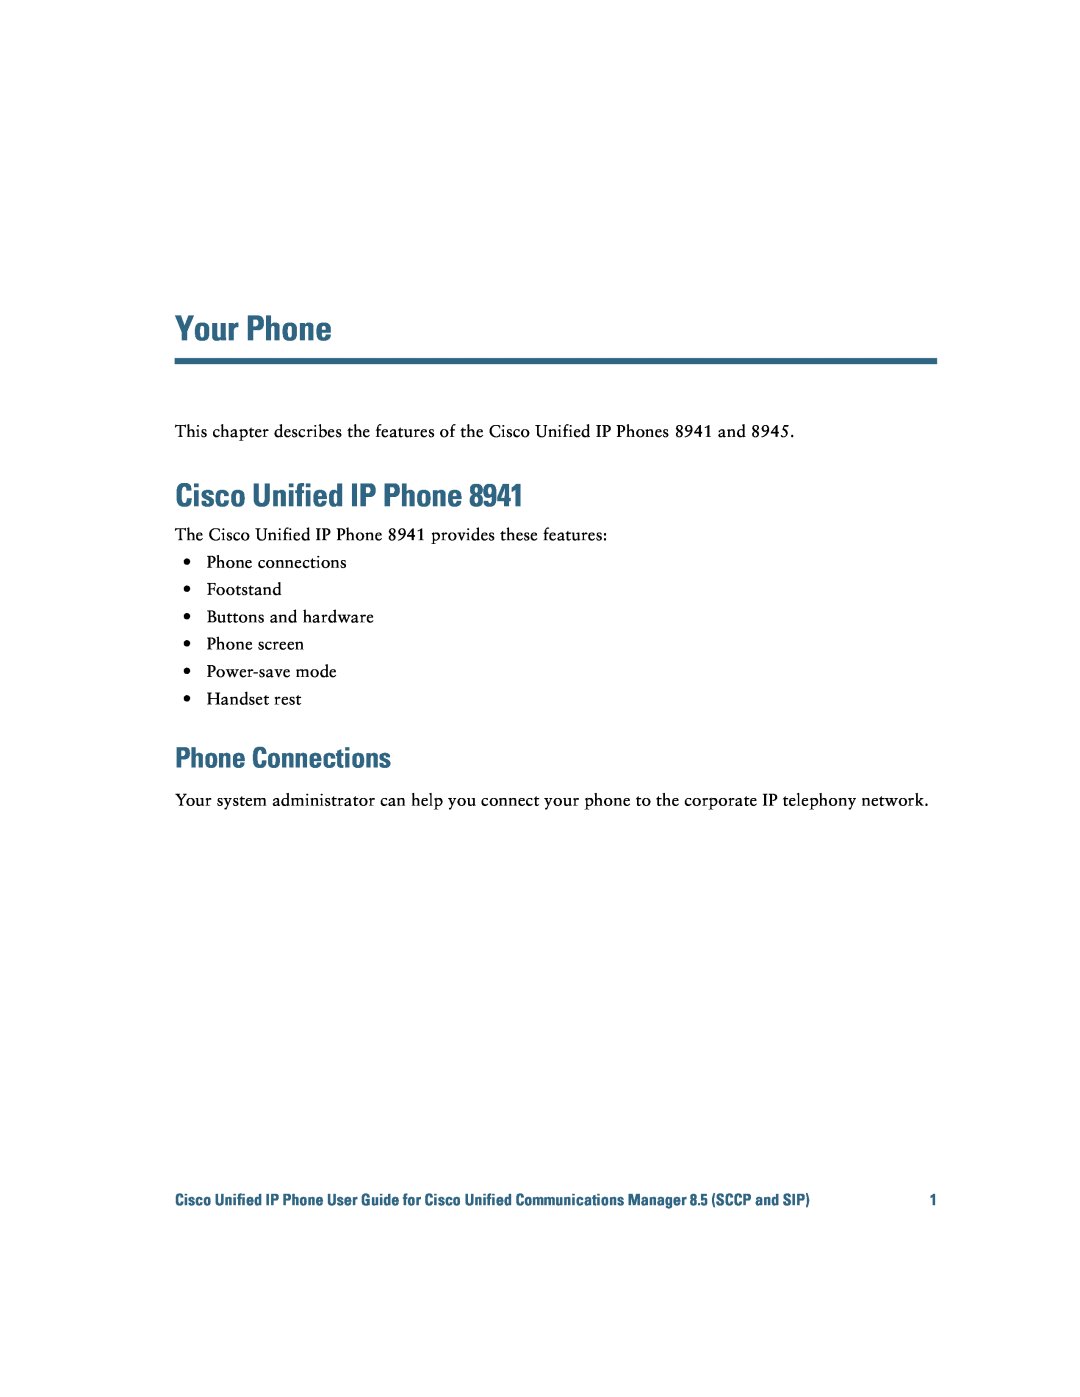 Cisco Systems IP Phone 8941 and 8945 manual Your Phone, Cisco Unified IP Phone, Phone Connections 